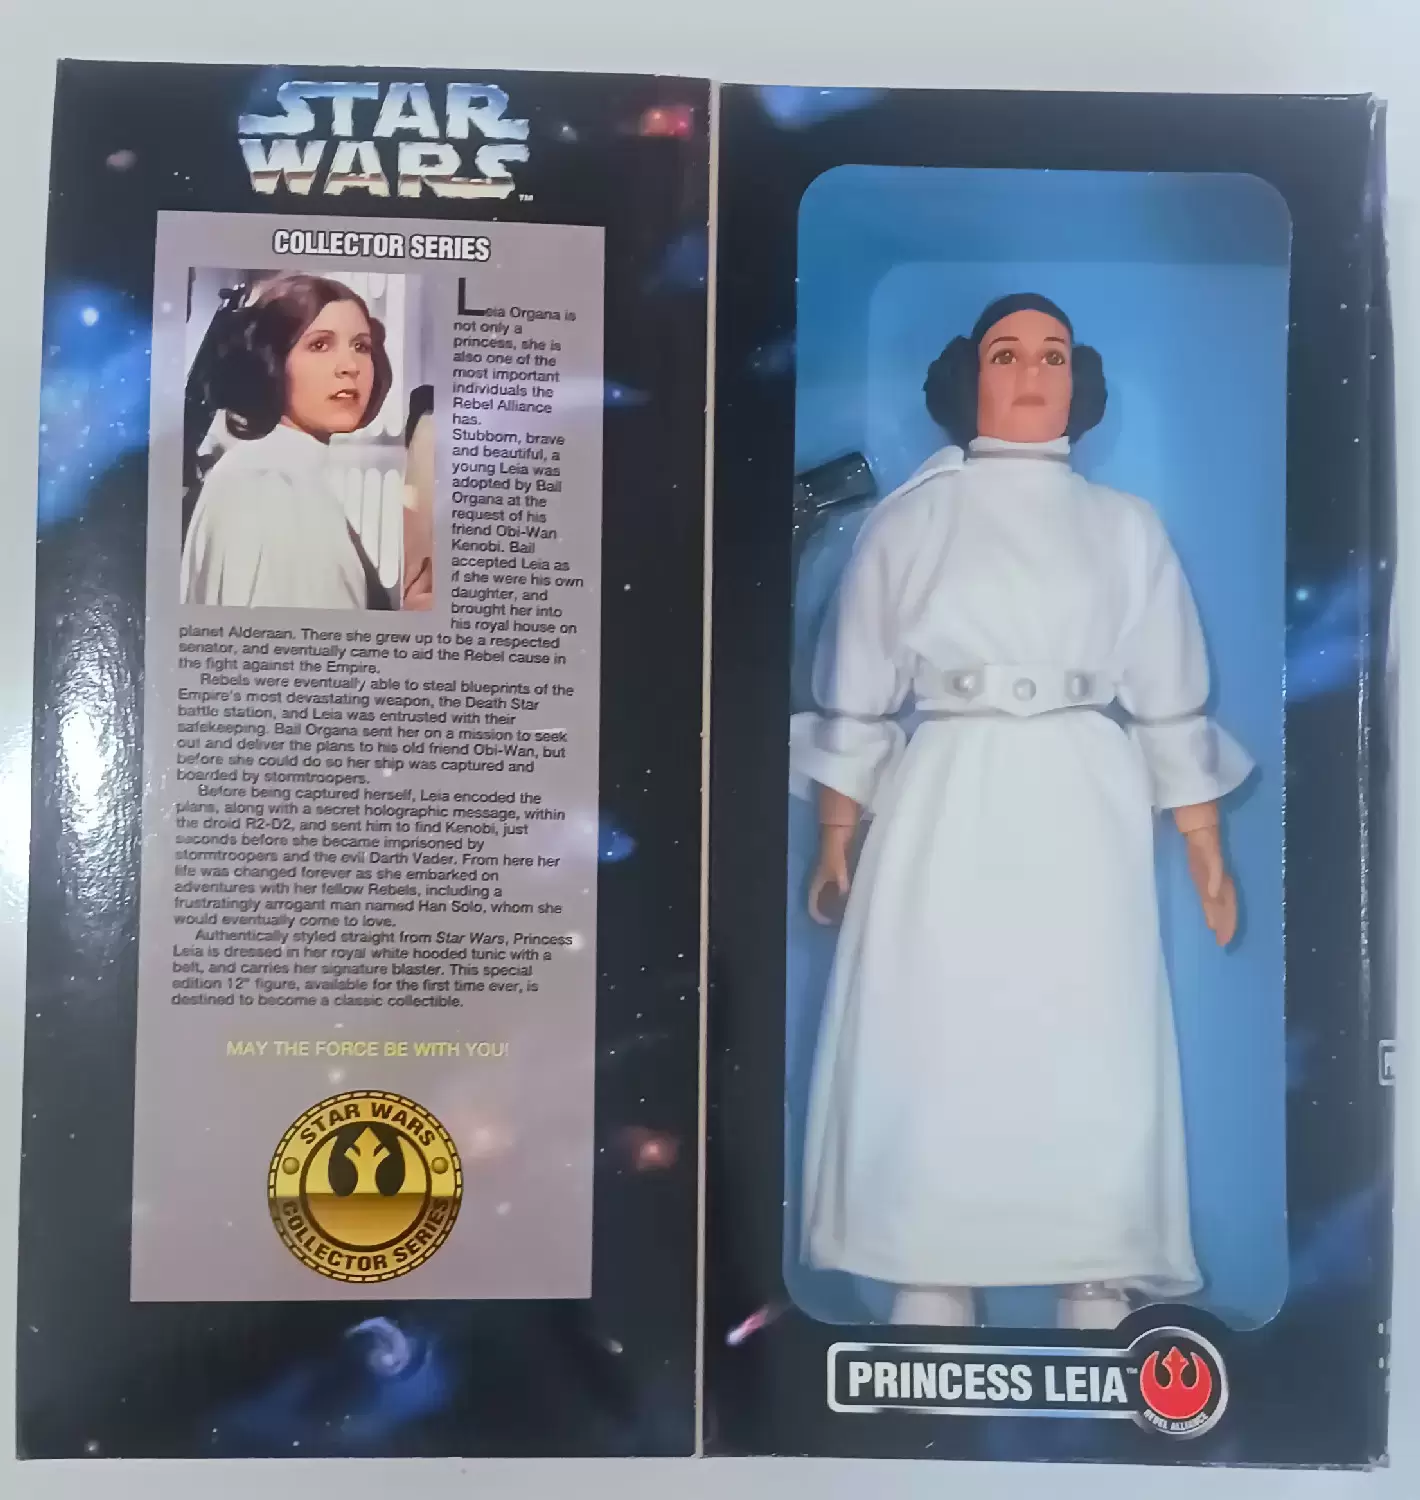 Power of the Force 2 - Star Wars Collector Series Princess Leia